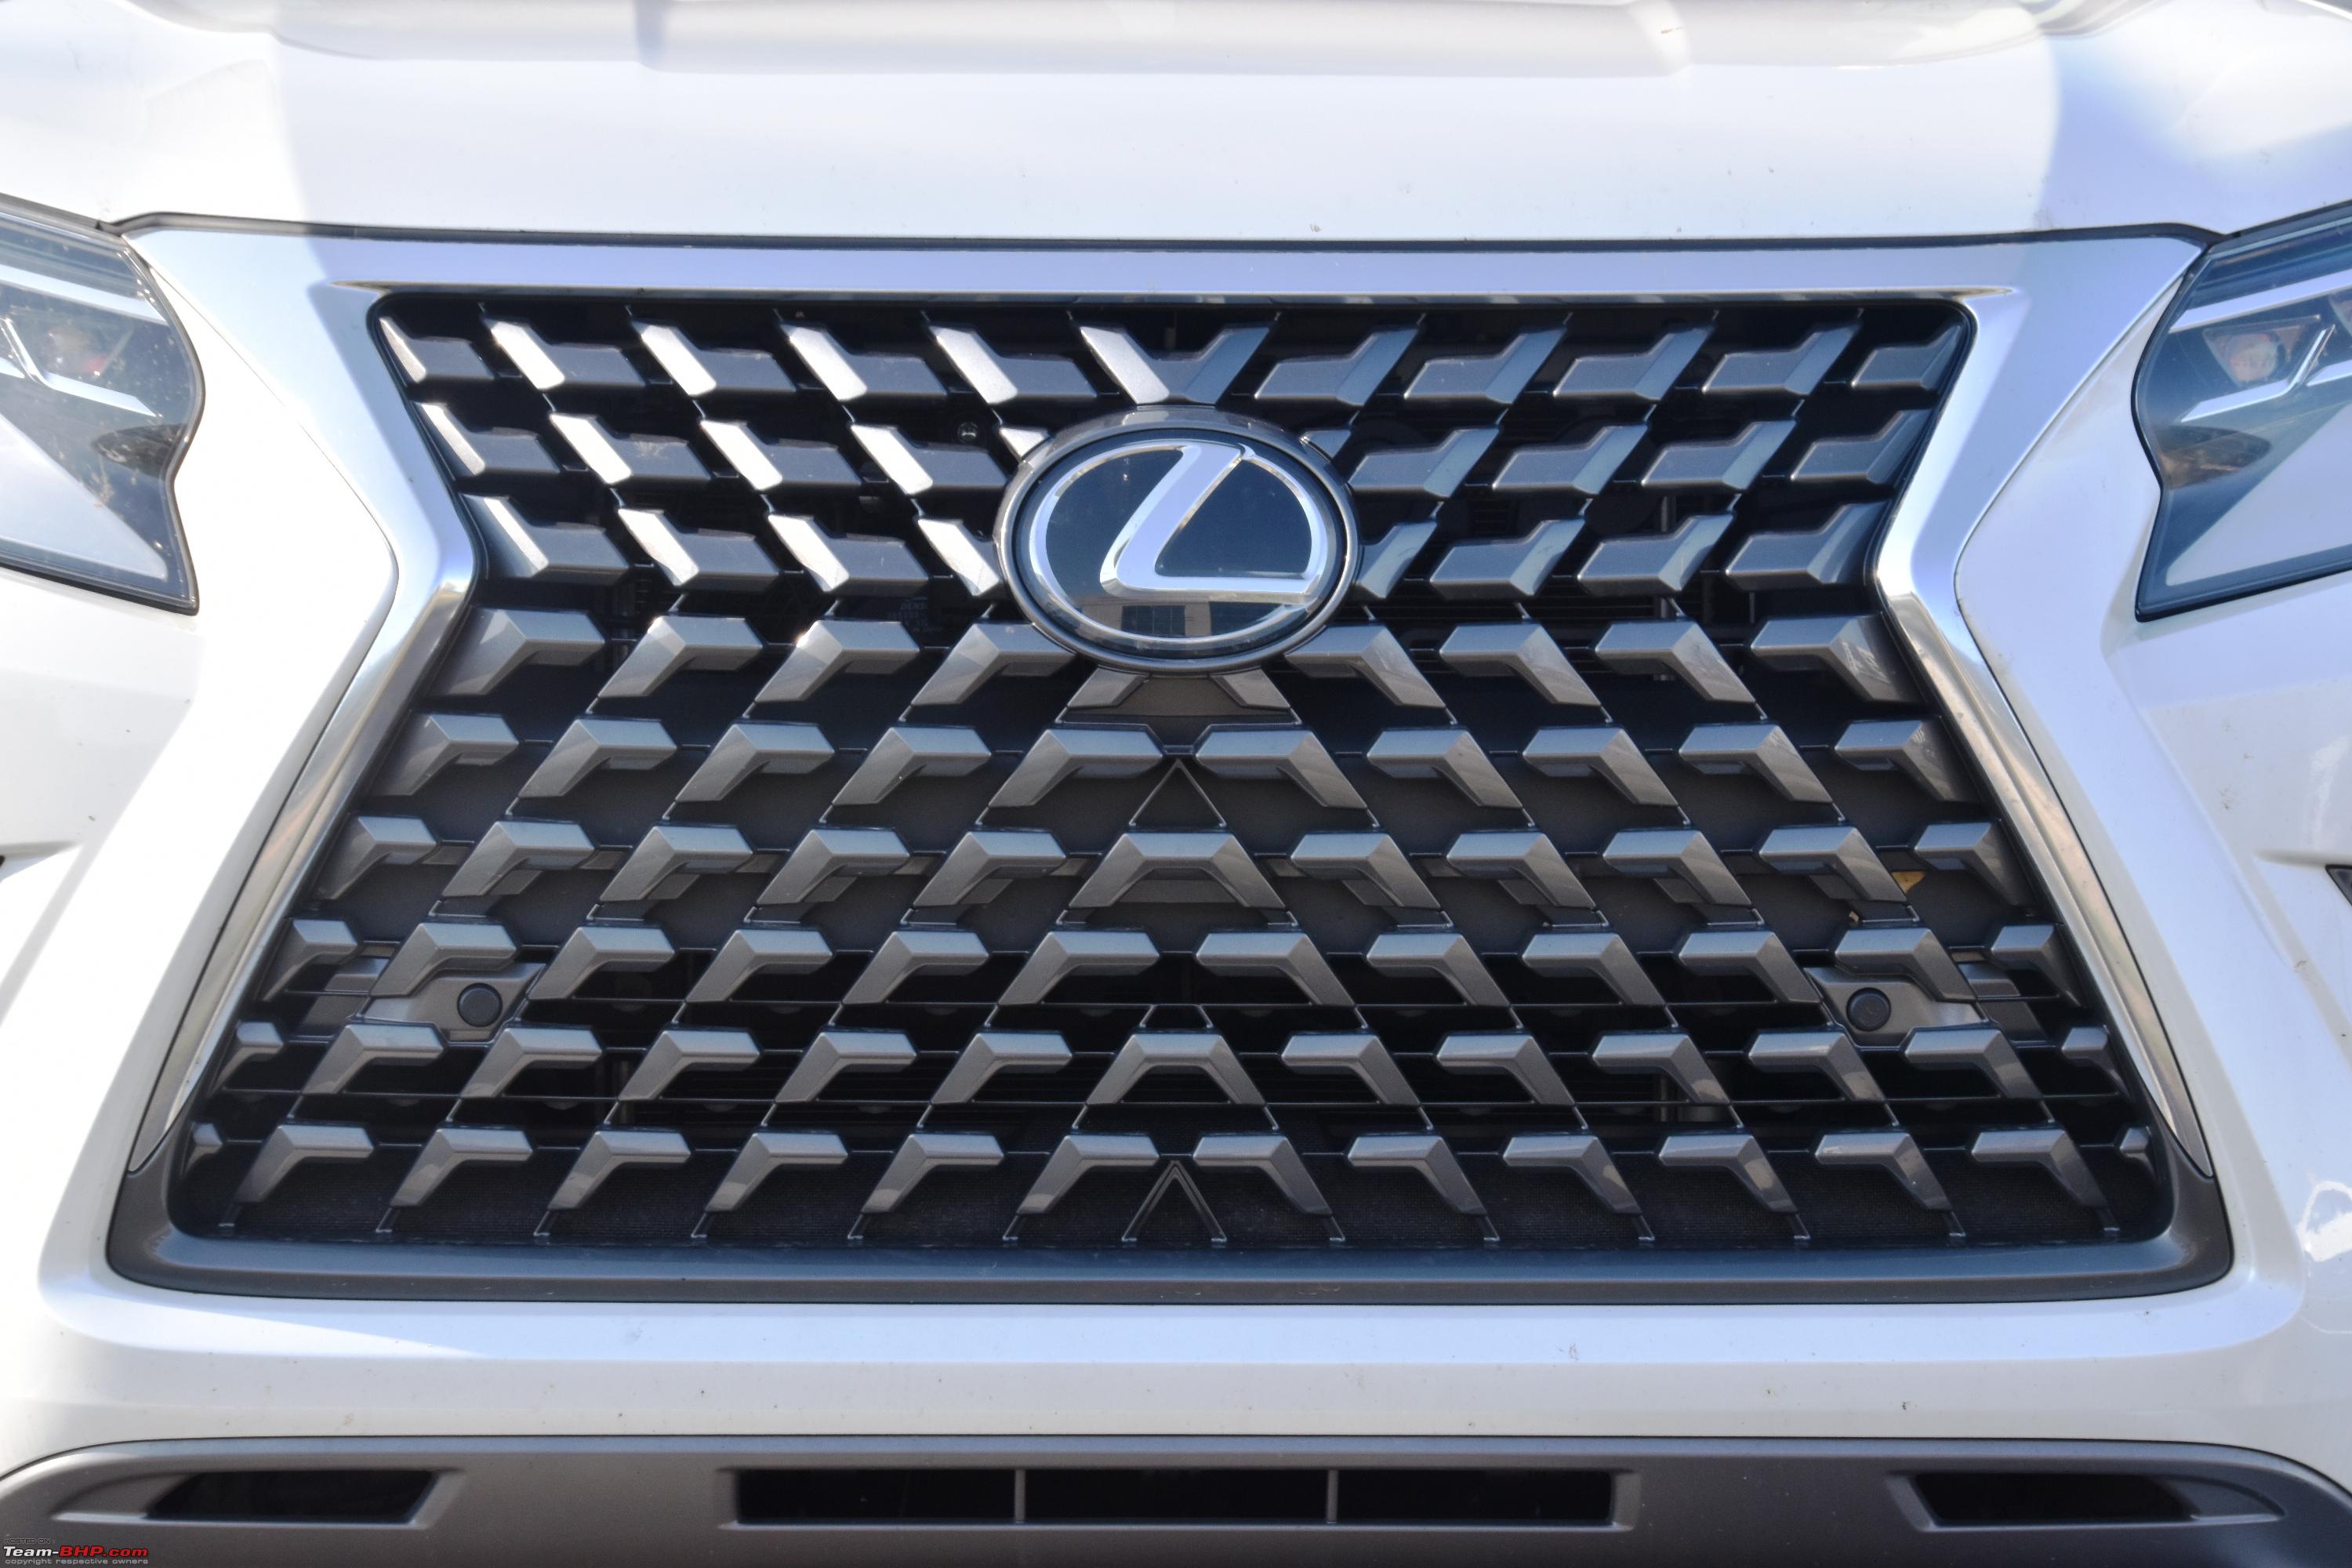 Lexus could tone down its spindle grille size; return to a more  conservative look - Team-BHP